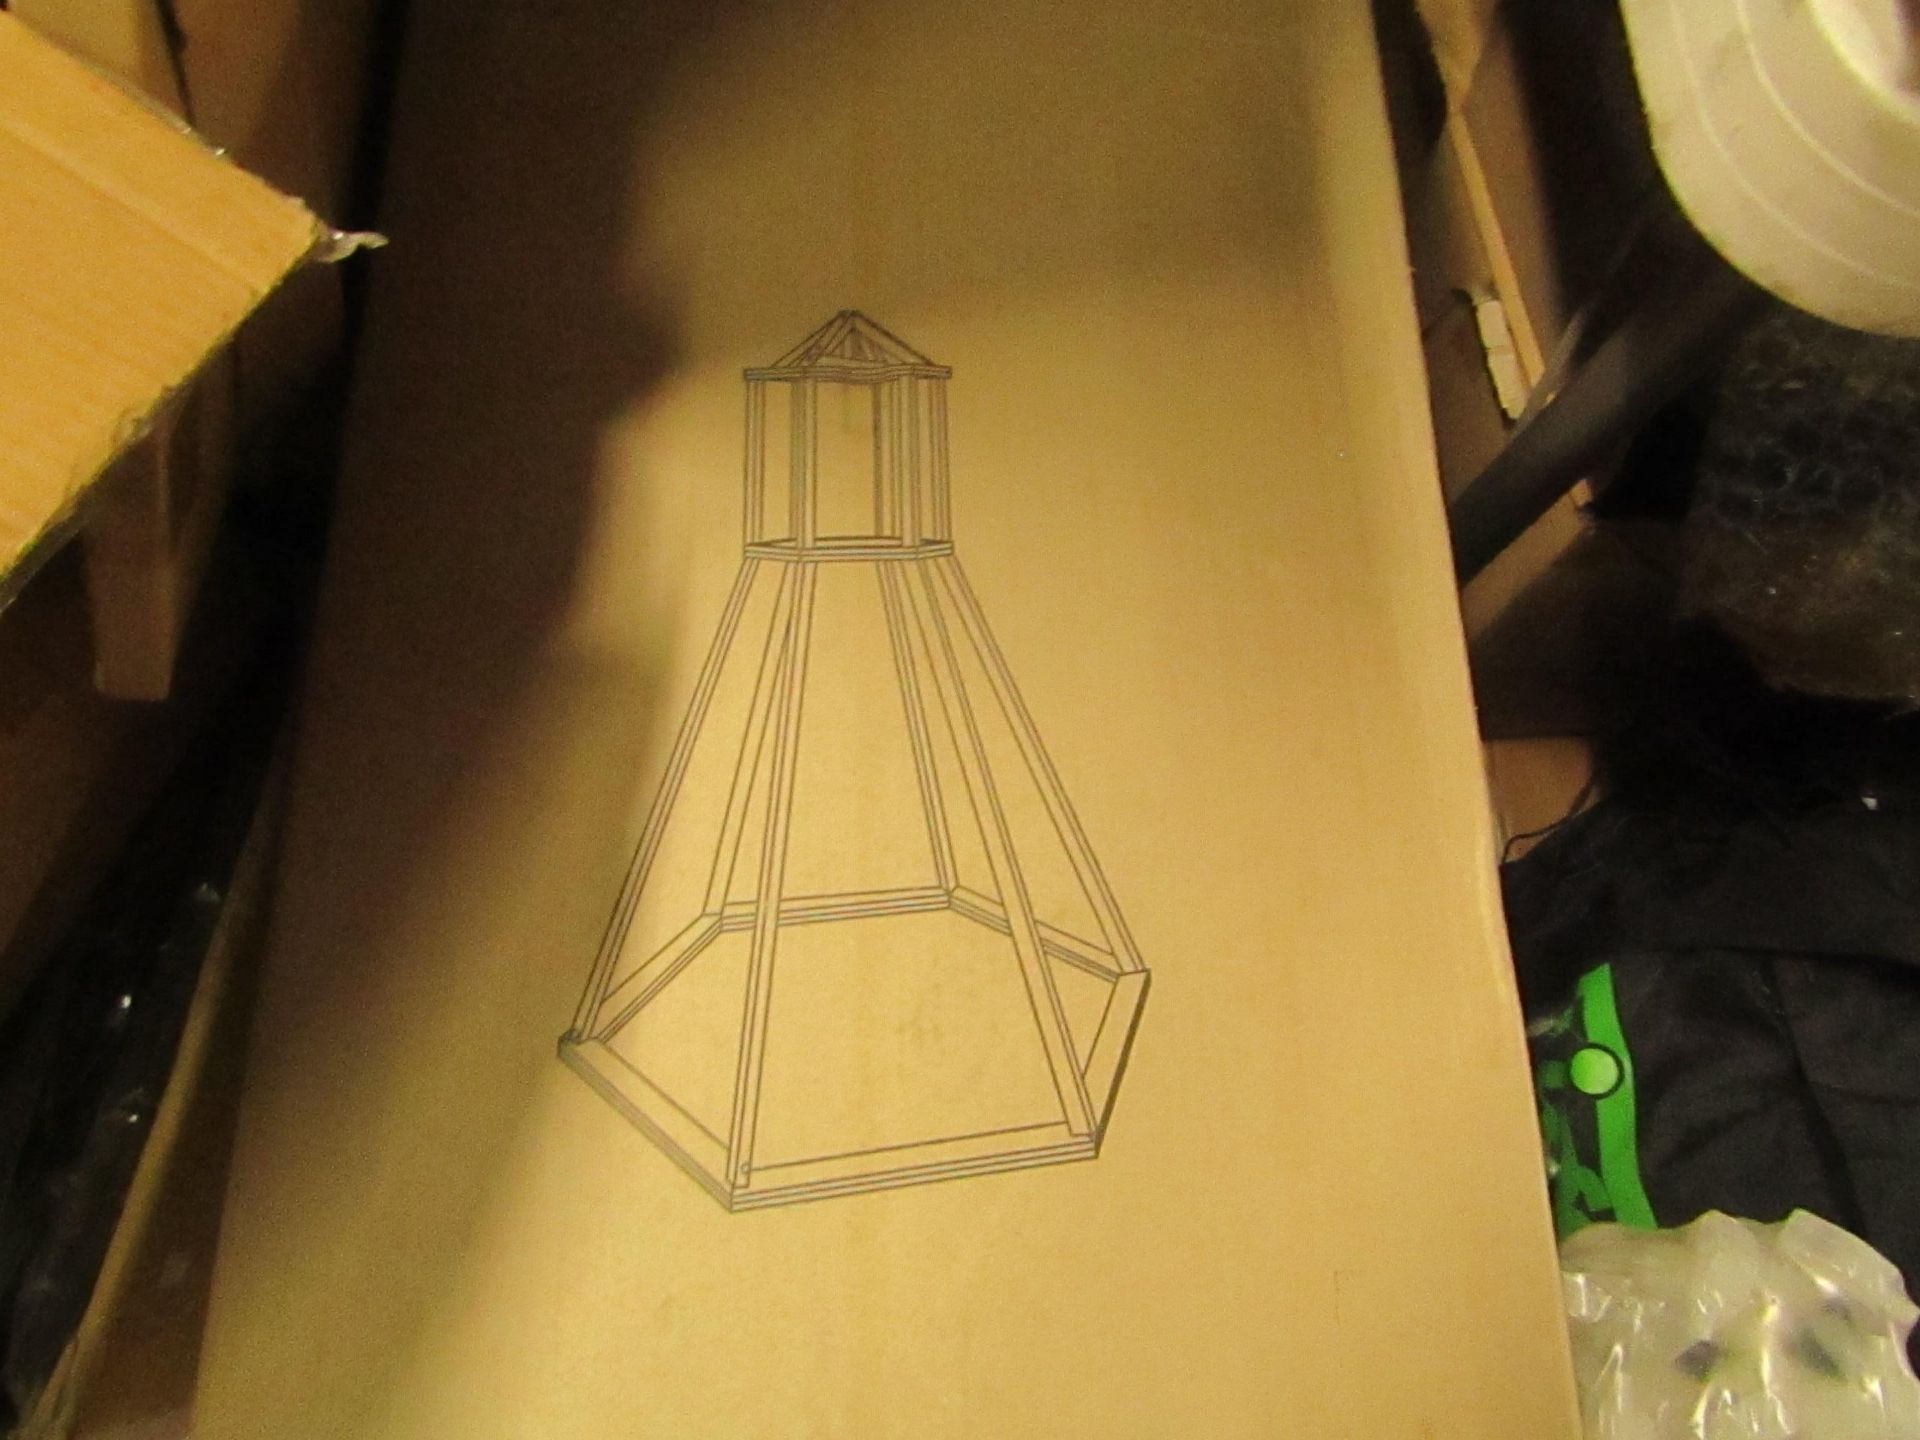 MountRose - Children's Lighthouse/Teepee - 1065x440x82mm - Item Only Contains Lighthouse Frame, Does - Image 2 of 2